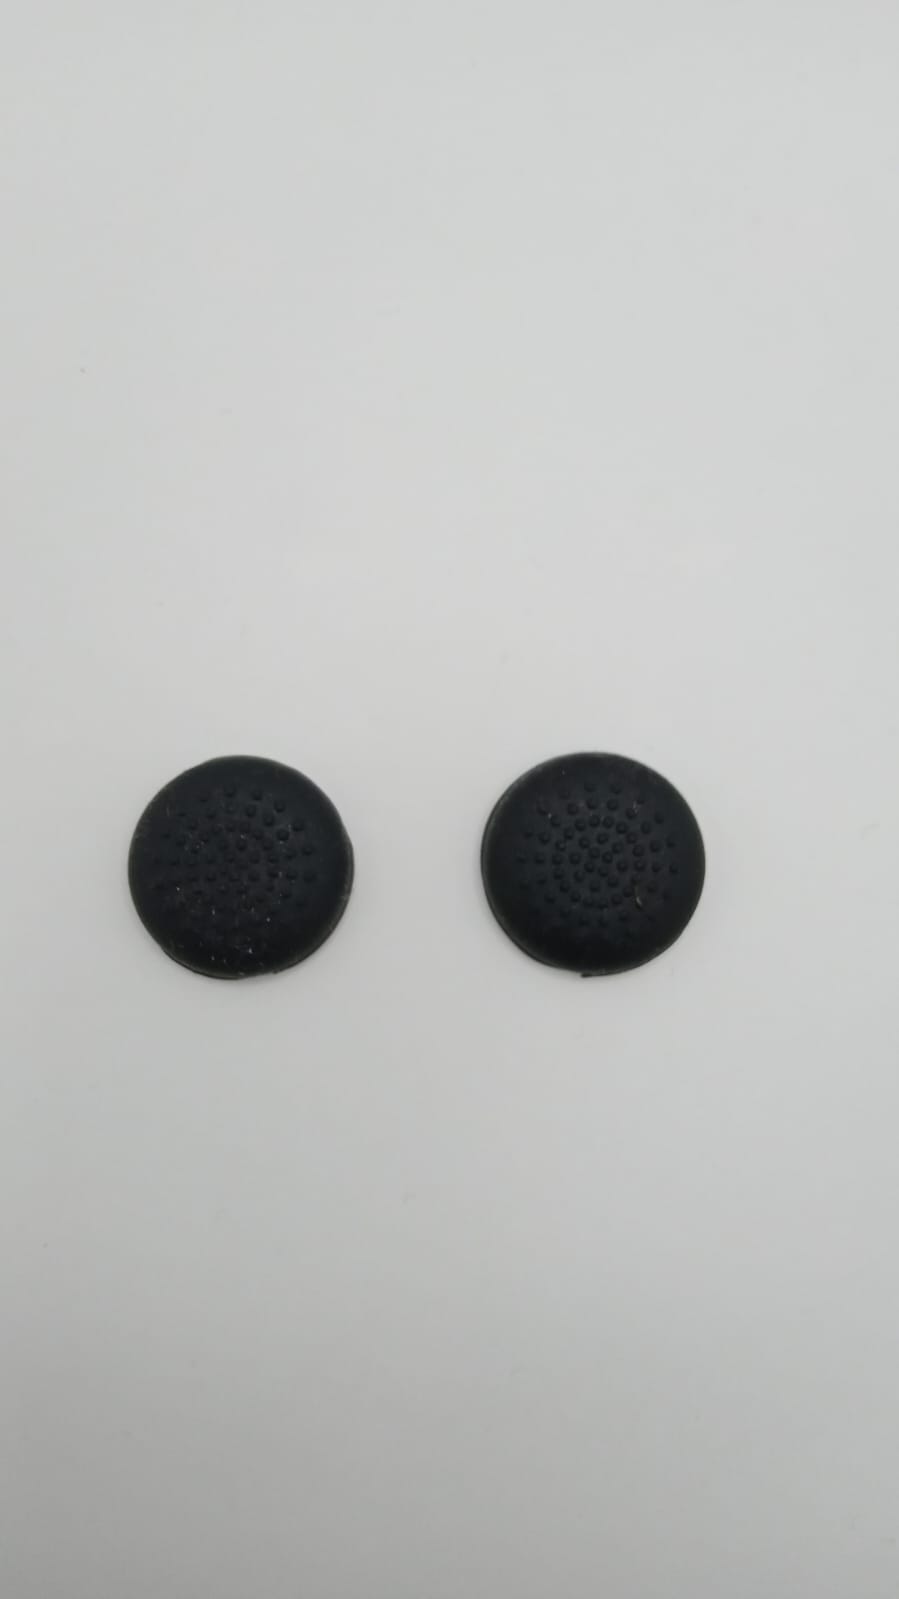 2 x Thumb Grips- XBOX One / XBOX 360 / PS4 / PS3 - 001